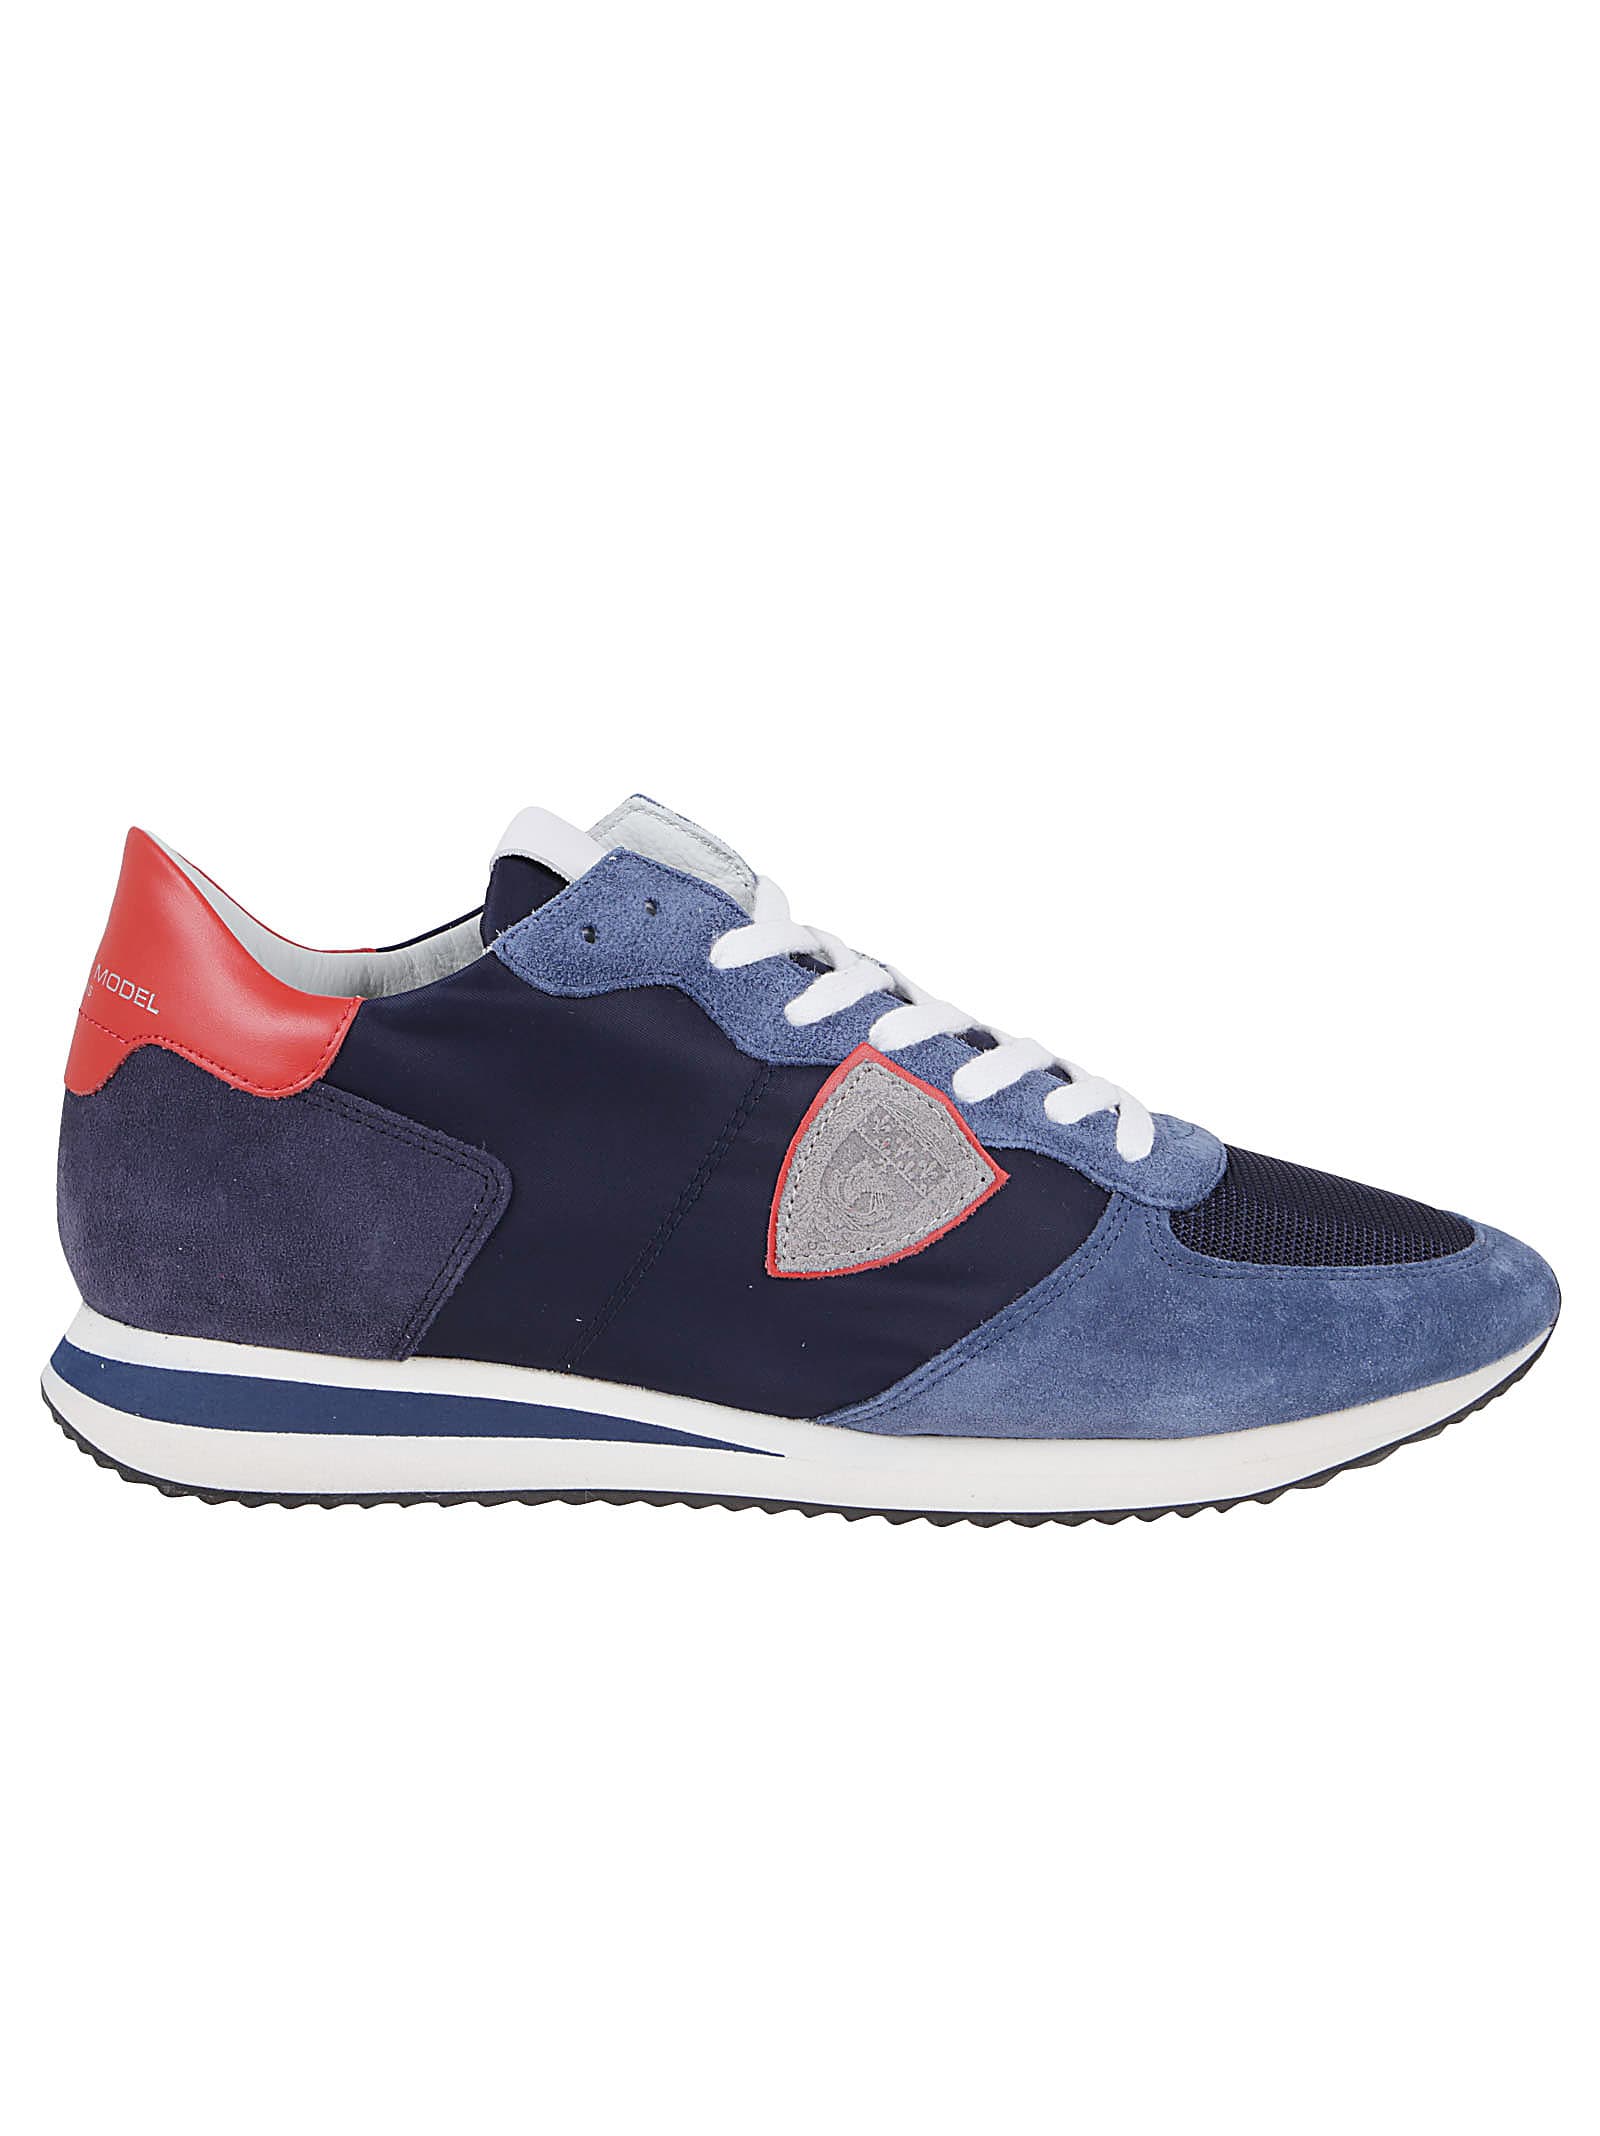 Philippe Model Trpx Sneakers In Blue Suede And Fabric In Blau